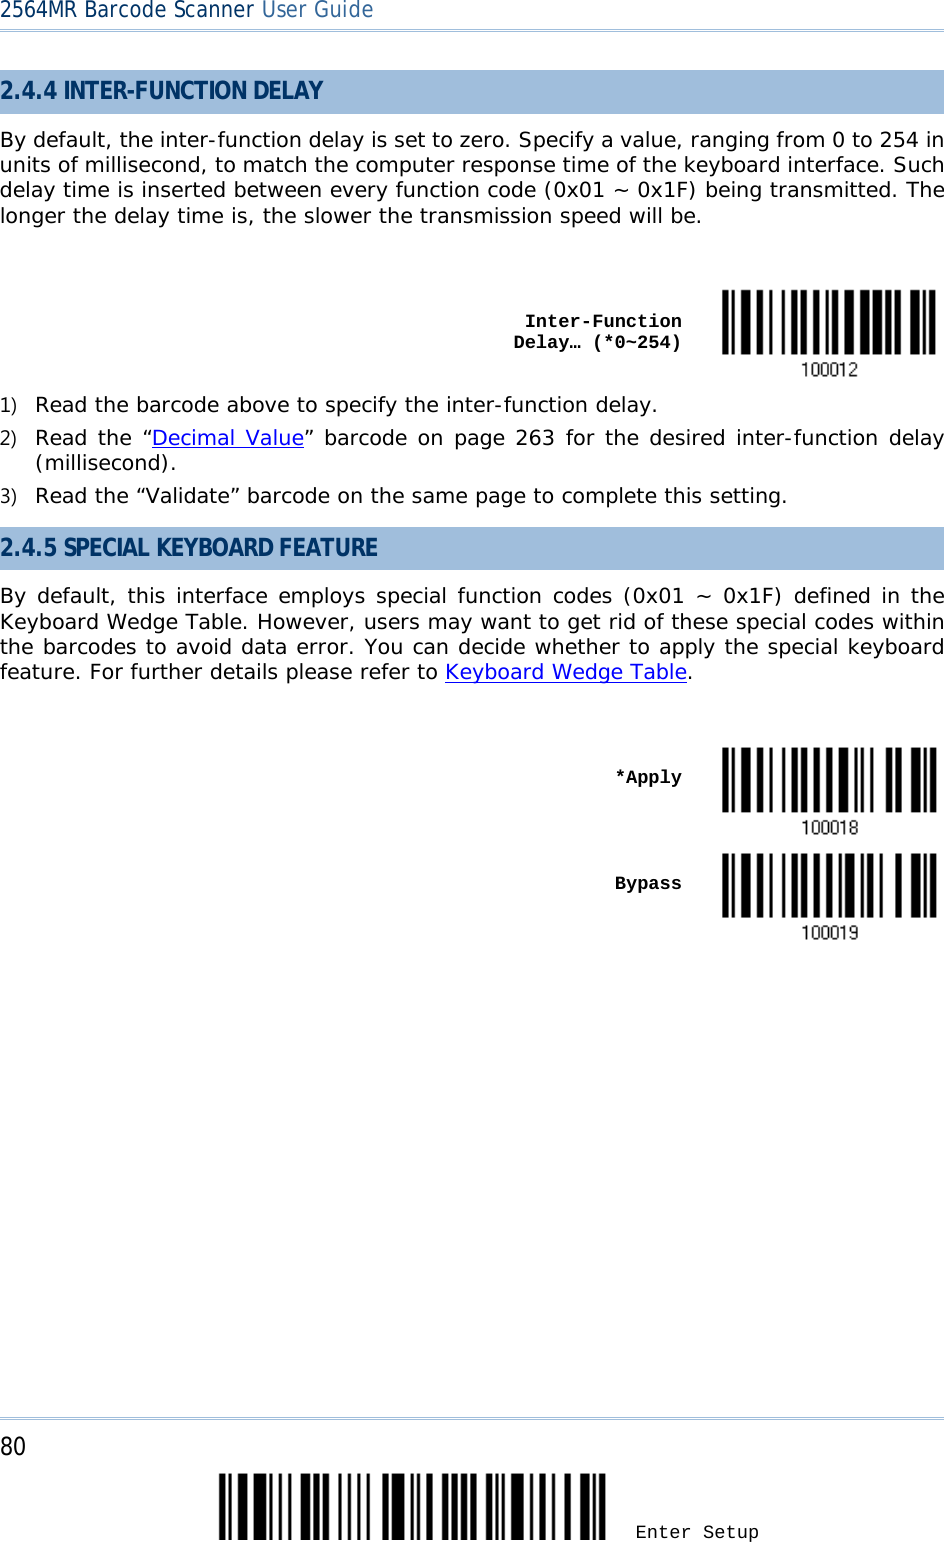 2564MR Barcode Scanner User Guide  2.4.4 INTER-FUNCTION DELAY By default, the inter-function delay is set to zero. Specify a value, ranging from 0 to 254 in units of millisecond, to match the computer response time of the keyboard interface. Such delay time is inserted between every function code (0x01 ~ 0x1F) being transmitted. The longer the delay time is, the slower the transmission speed will be.     Inter-Function Delay… (*0~254)  1) Read the barcode above to specify the inter-function delay. 2) Read the “Decimal Value” barcode on page 263 for the desired inter-function delay (millisecond).  3) Read the “Validate” barcode on the same page to complete this setting. 2.4.5 SPECIAL KEYBOARD FEATURE By default, this interface employs special function codes (0x01 ~ 0x1F) defined in the Keyboard Wedge Table. However, users may want to get rid of these special codes within the barcodes to avoid data error. You can decide whether to apply the special keyboard feature. For further details please refer to Keyboard Wedge Table.     *Apply     Bypass   80 Enter Setup 